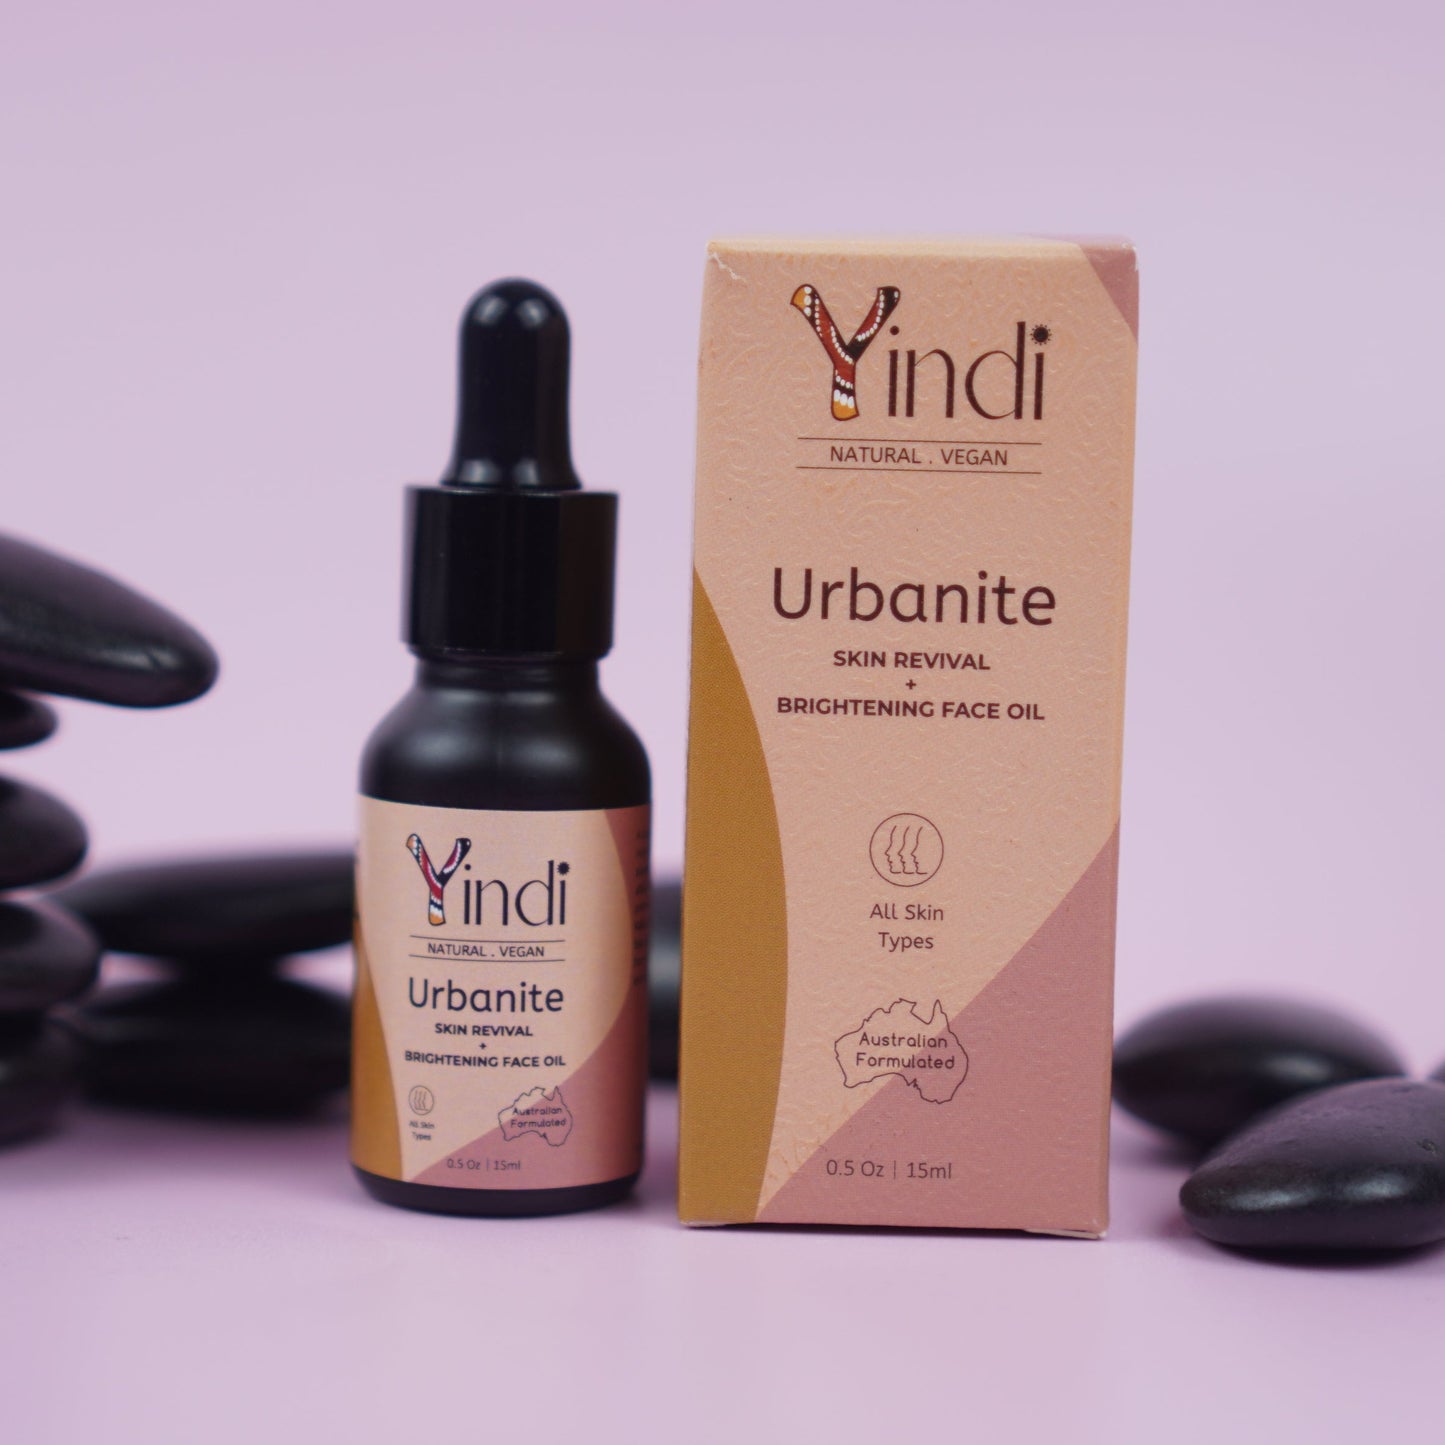 Urbanite Skin Revival + Brightening Face Oil with Prickly Pear Seed Oil (15ml)